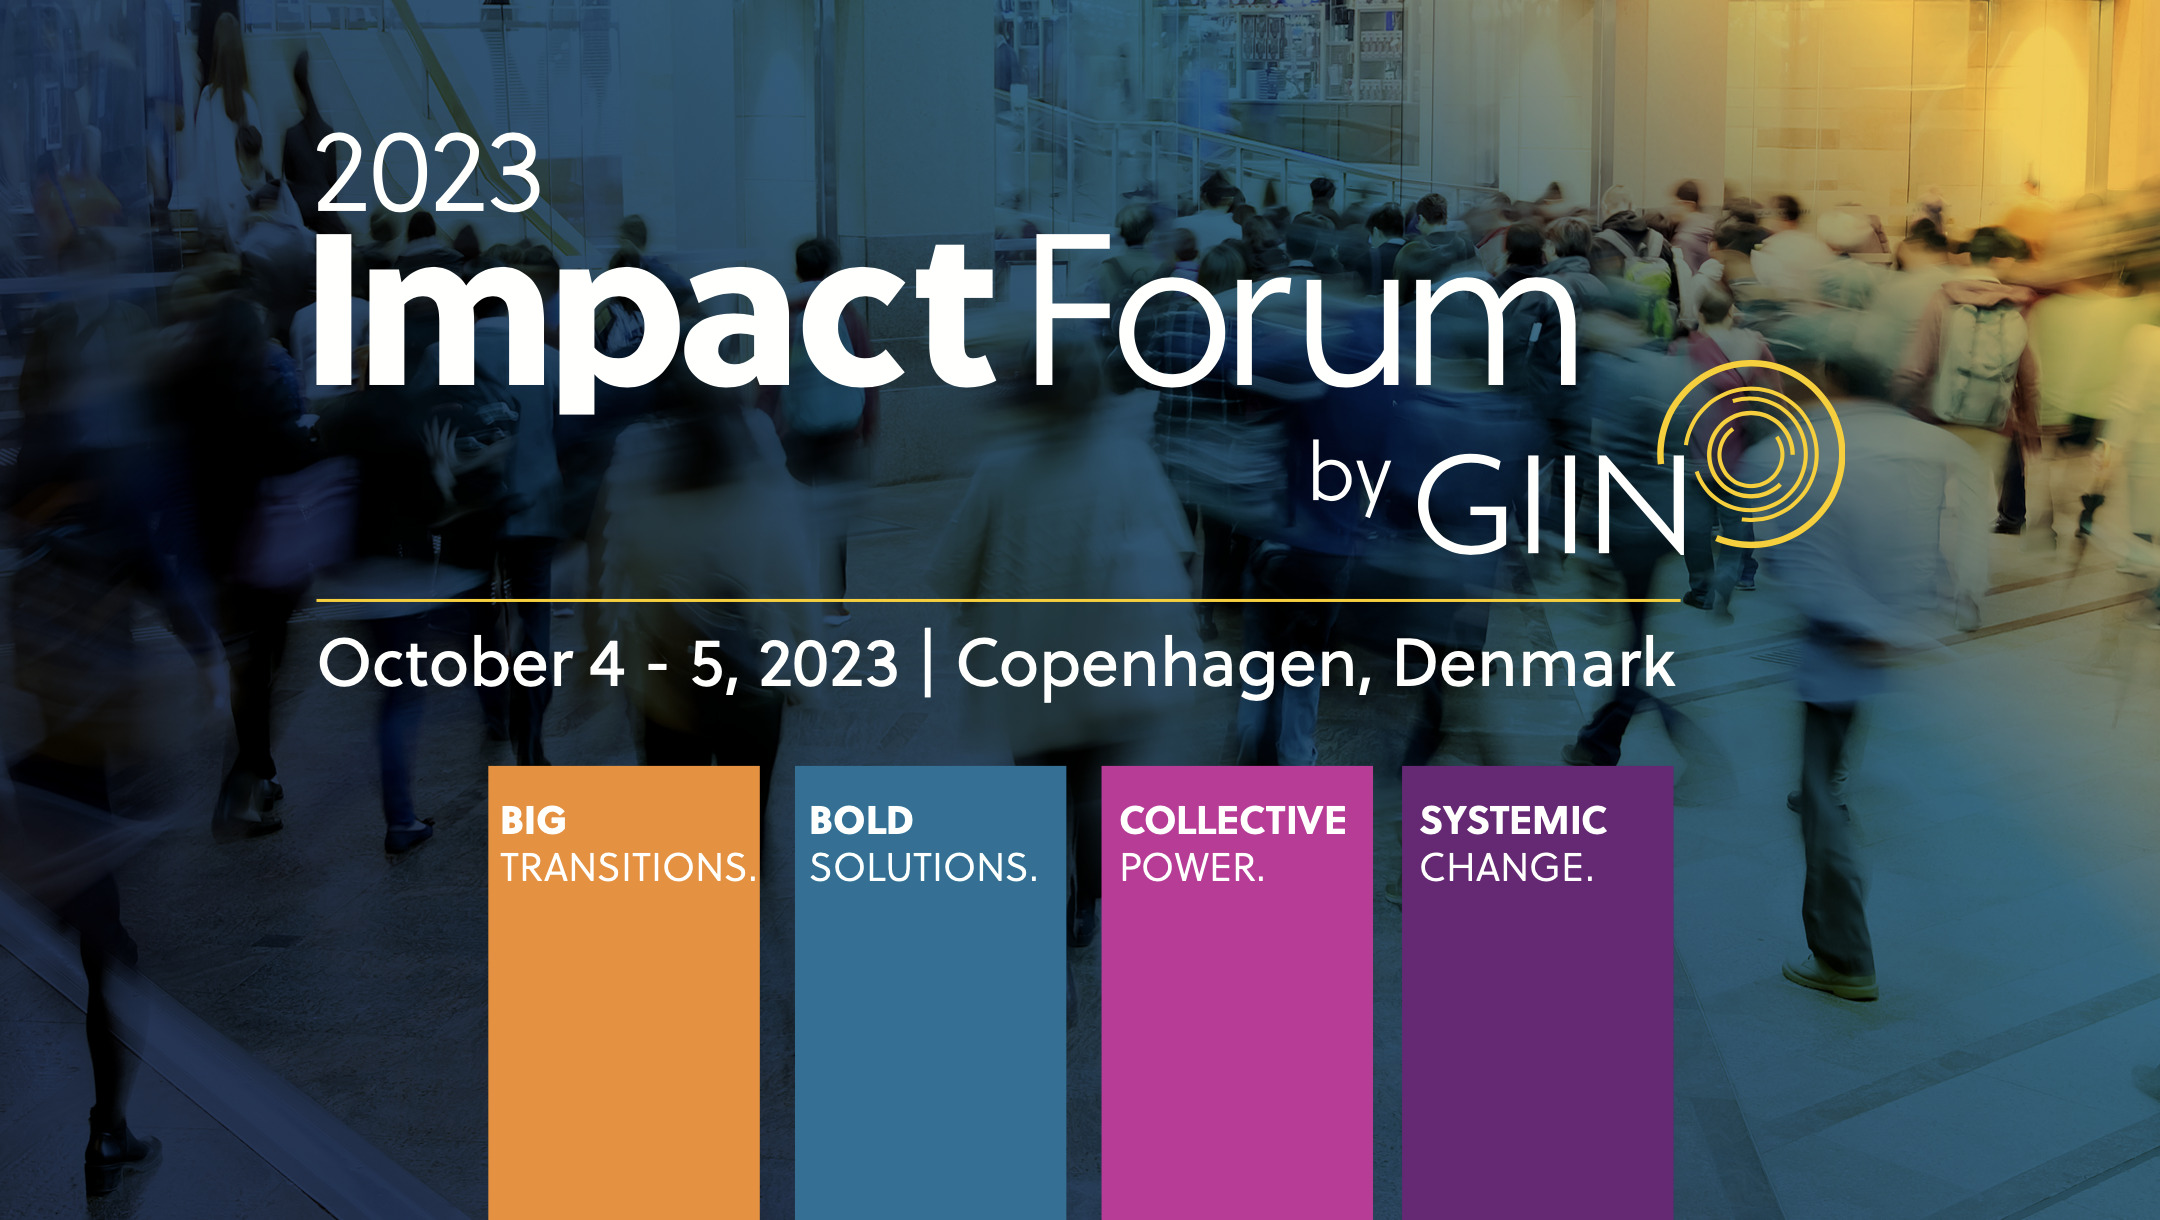 The ICFA hosts an Exhibitor Booth at the GIIN Impact Forum 2023